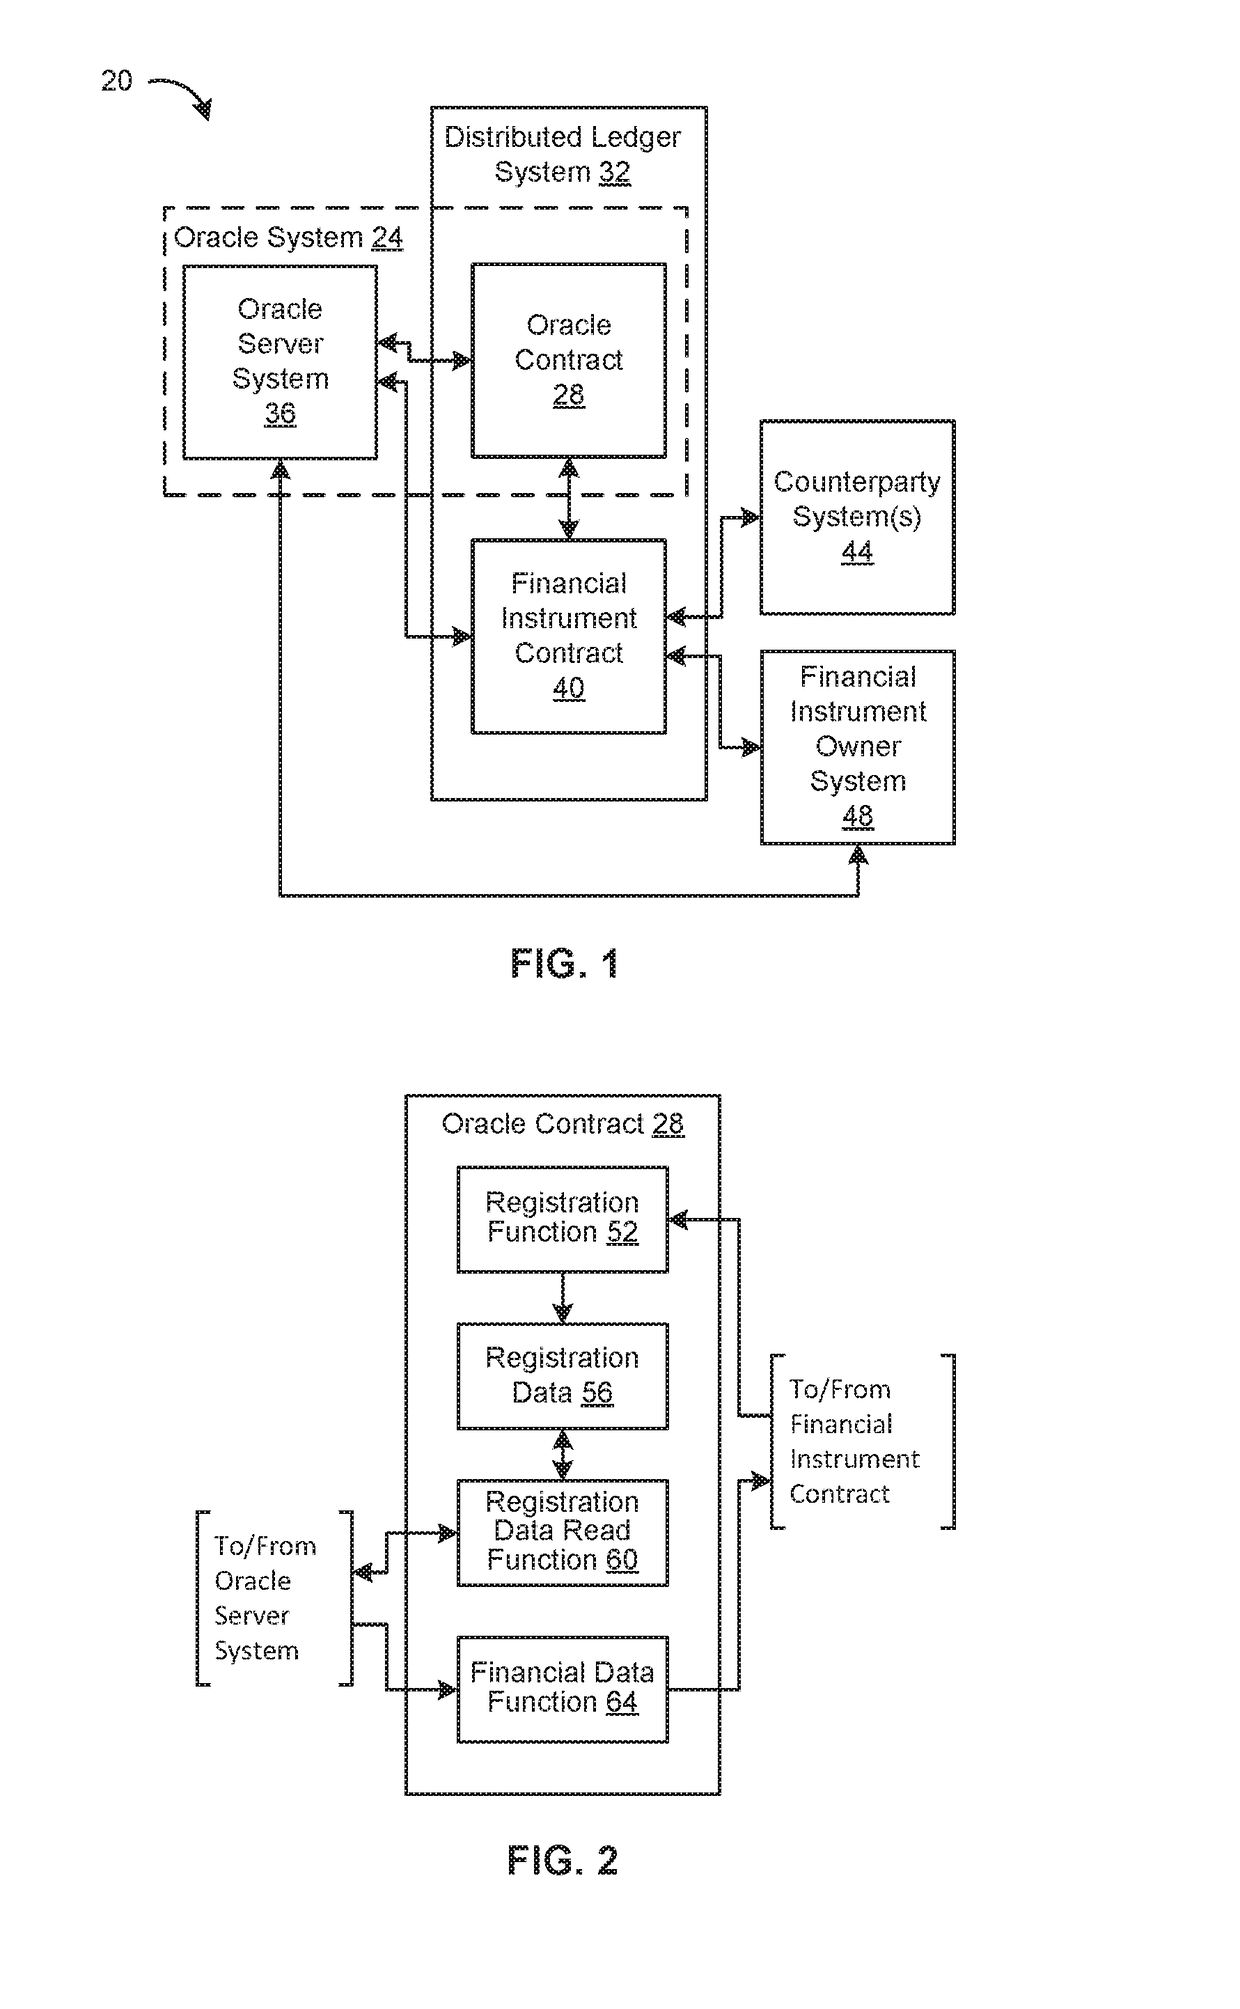 Systems and methods for providing financial data to financial instruments in a distributed ledger system